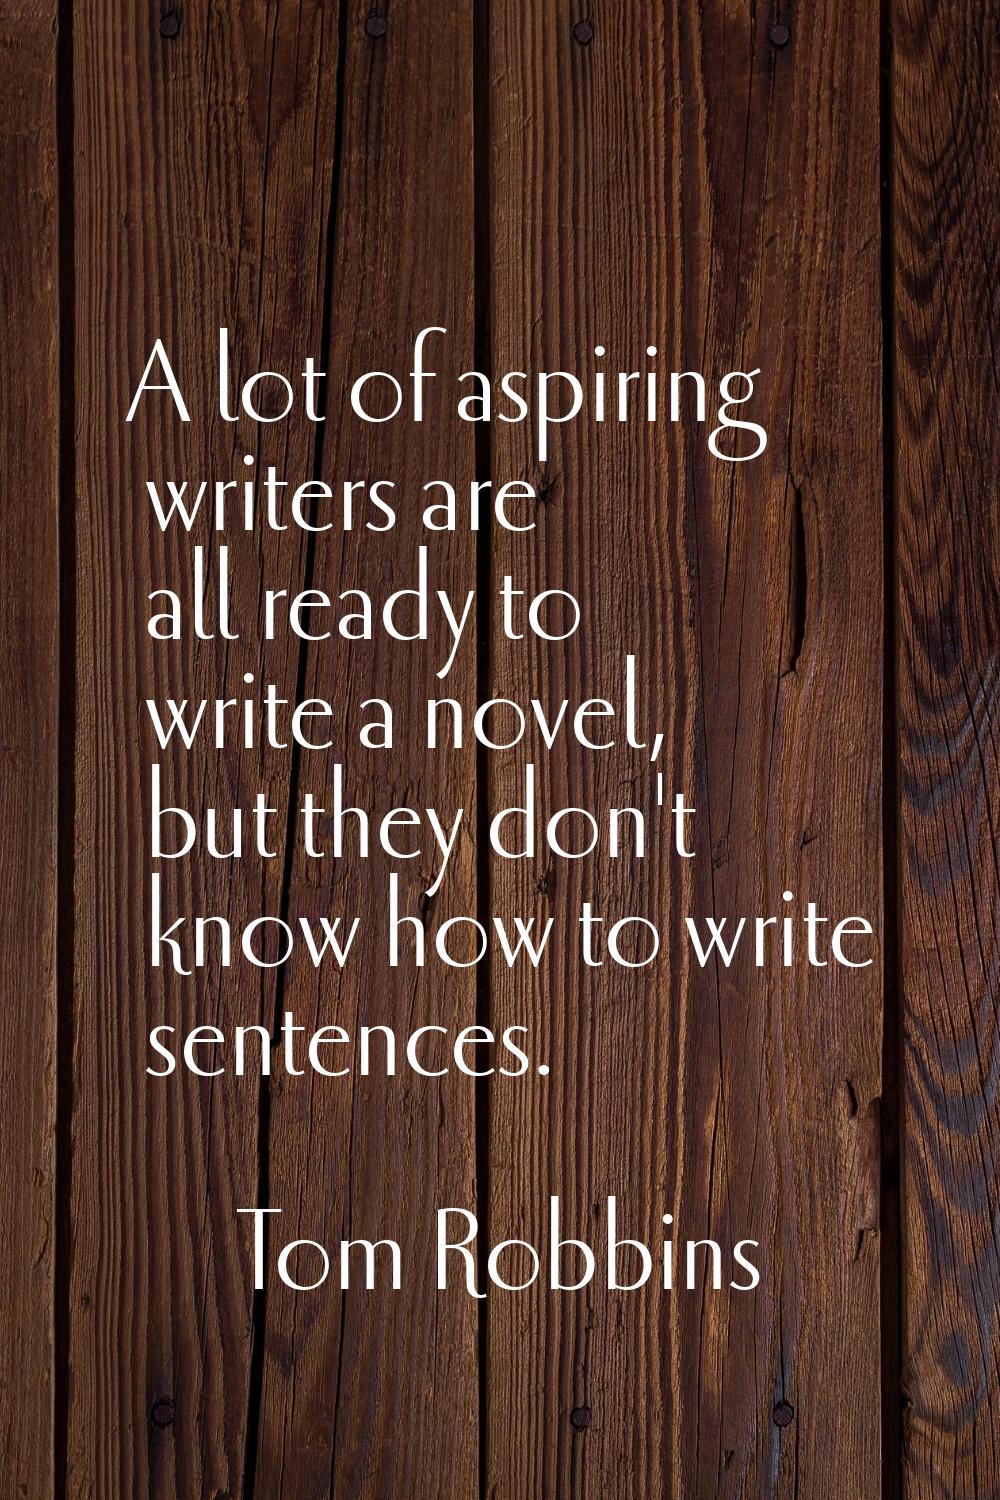 A lot of aspiring writers are all ready to write a novel, but they don't know how to write sentence